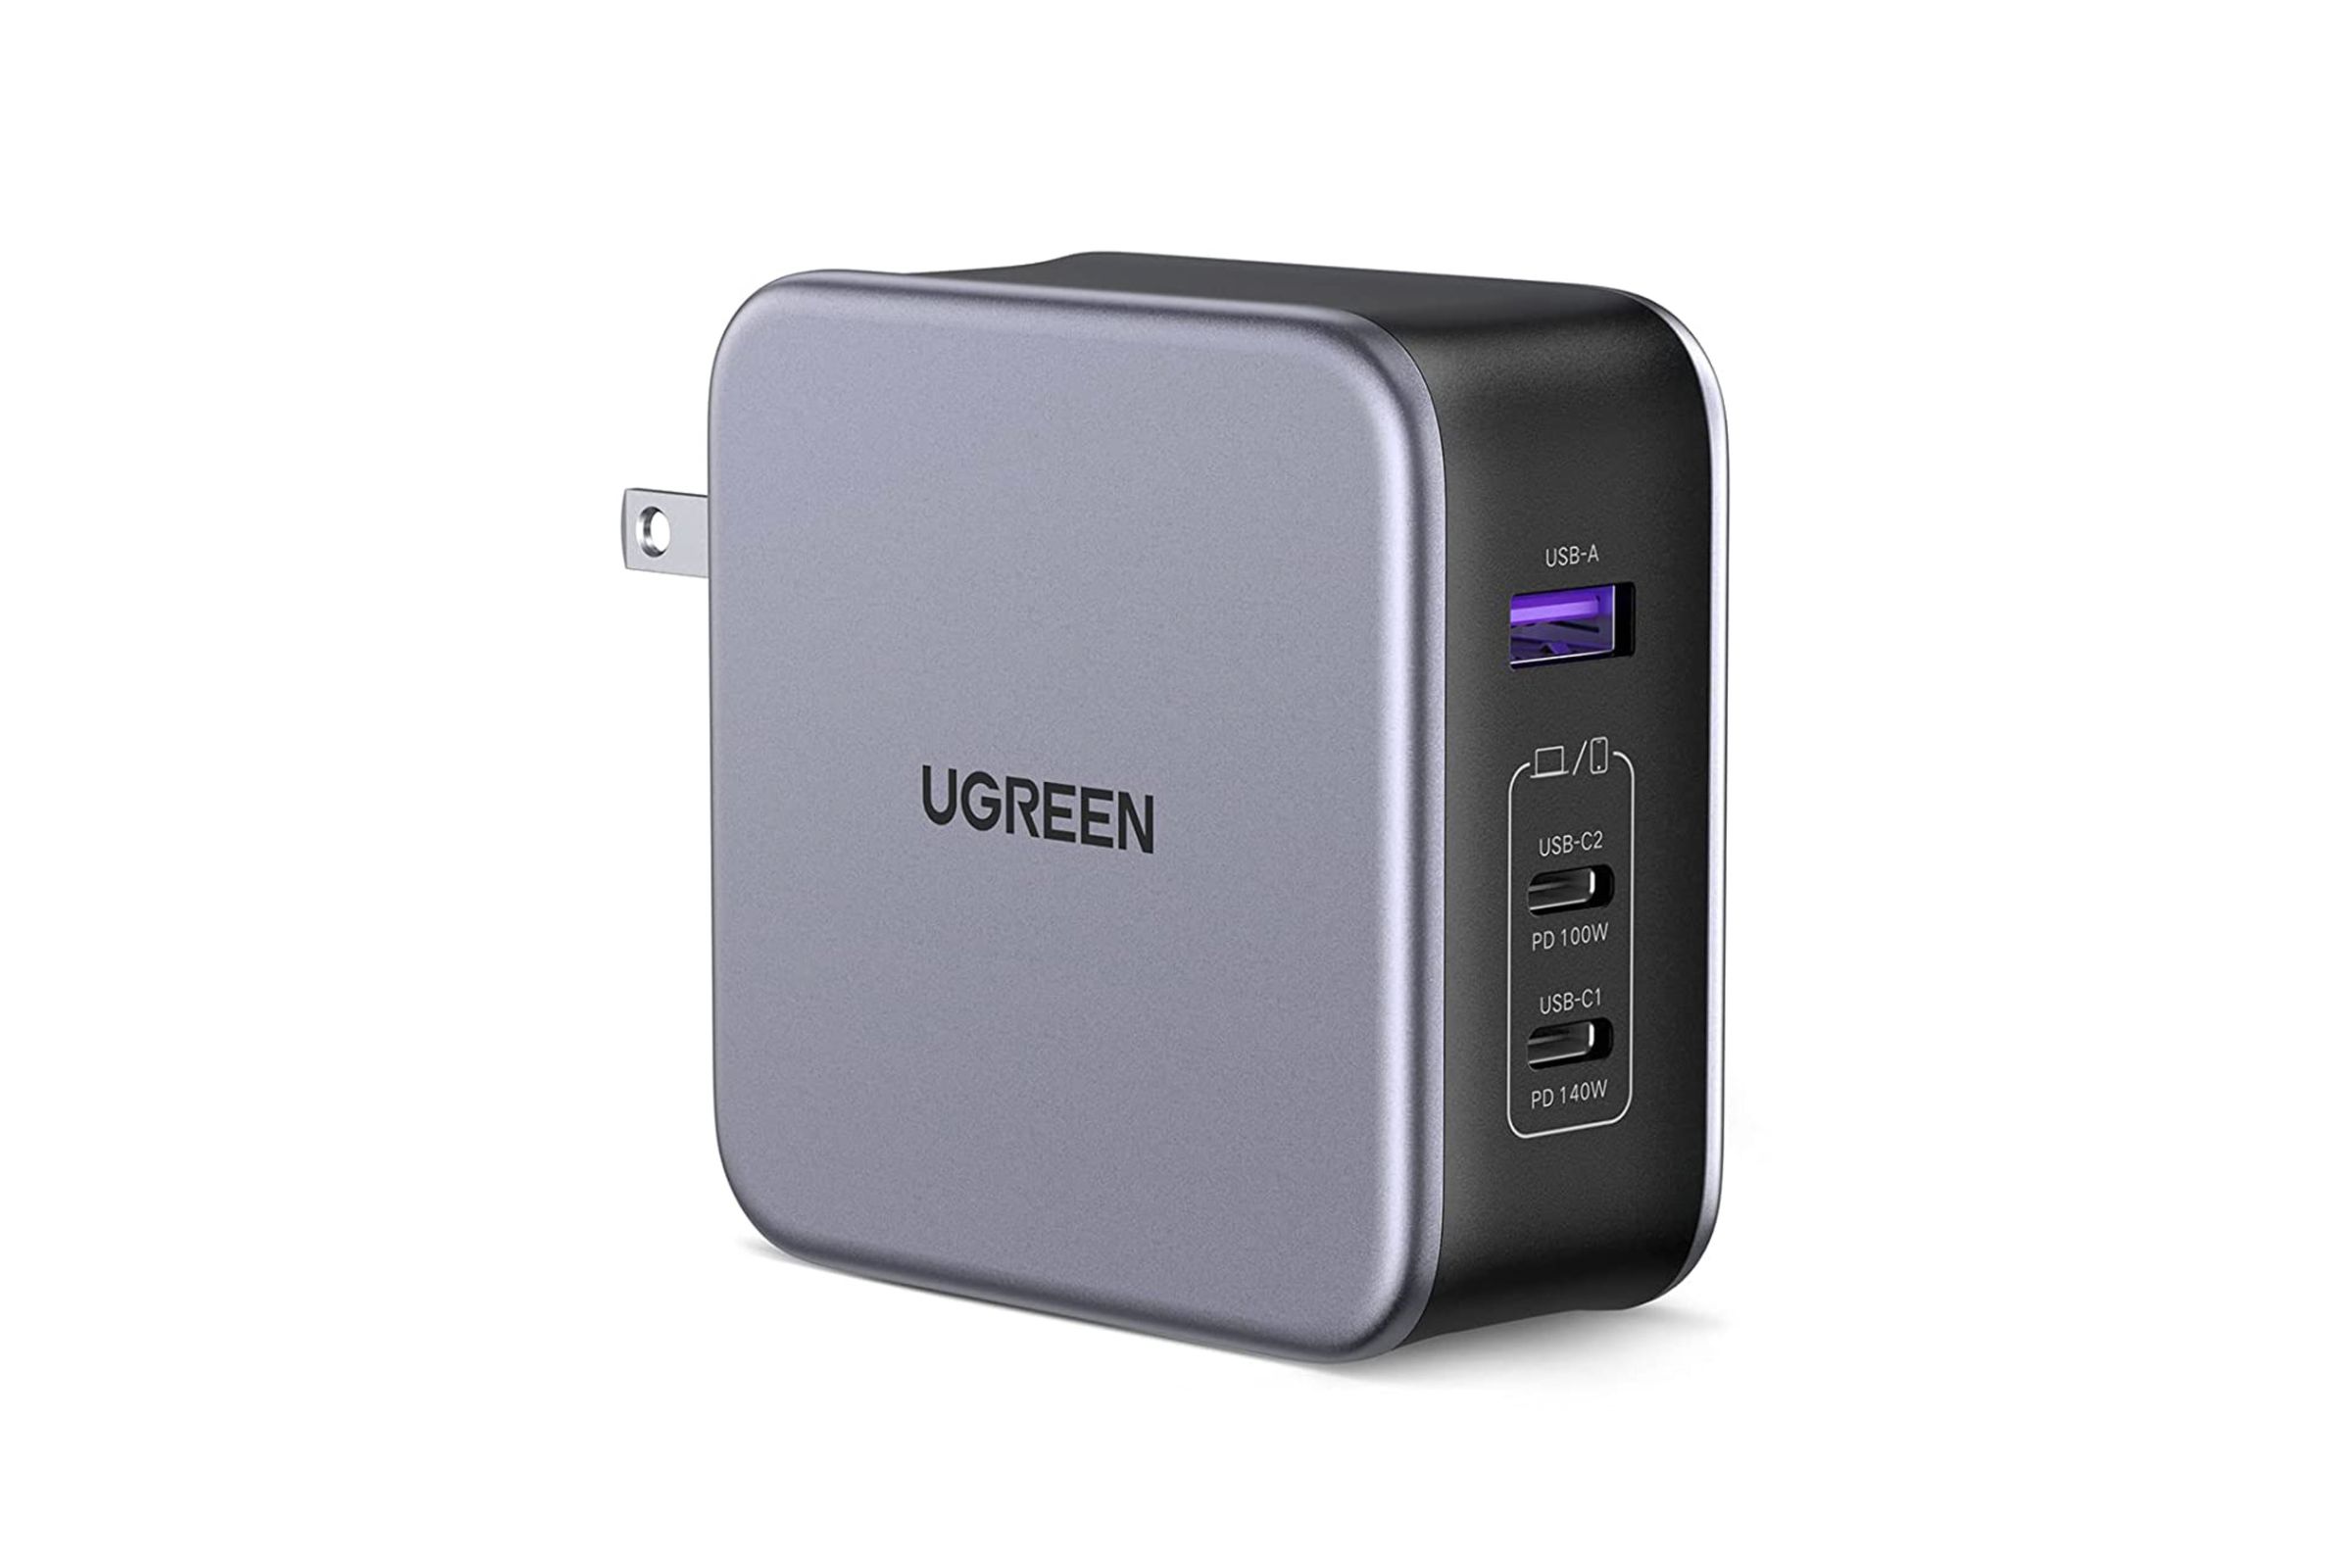 Ugreen claims its Nexode 140W can fast charge a 16-inch MacBook Pro from 0 to 56 percent in 30 minutes.